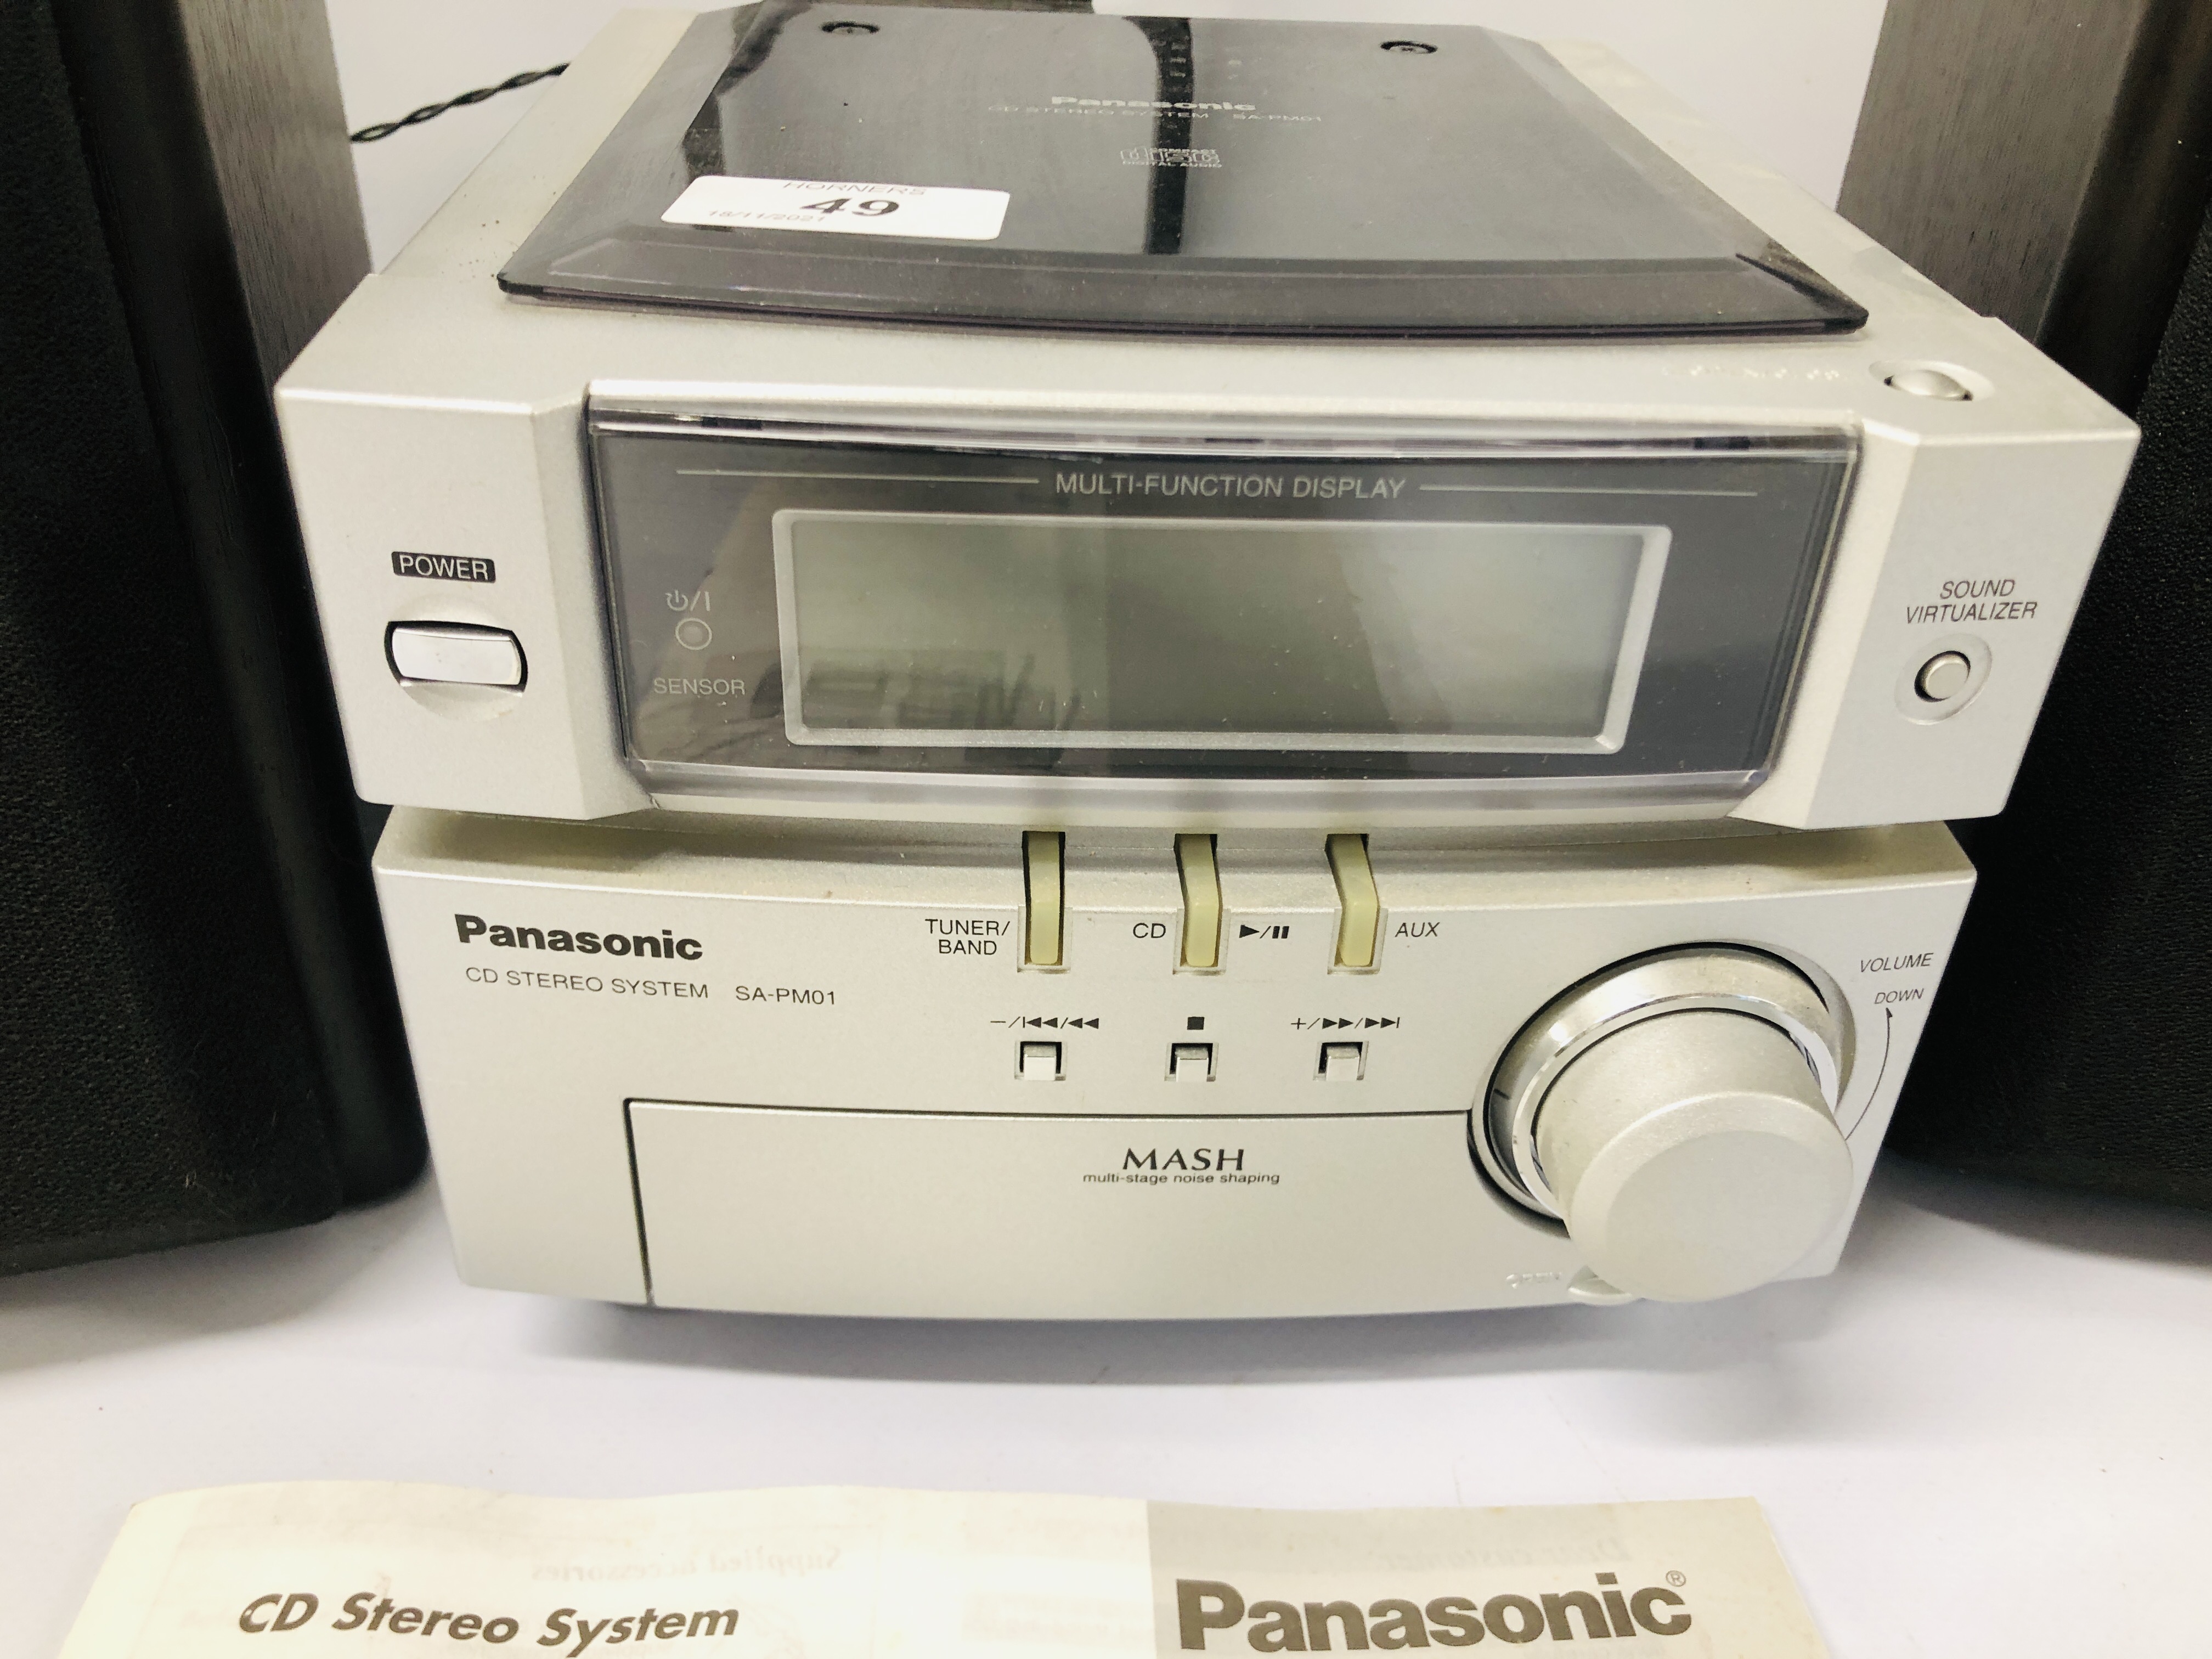 PANASONIC COMPACT CD STEREO SYSTEM - SOLD AS SEEN - Image 3 of 3